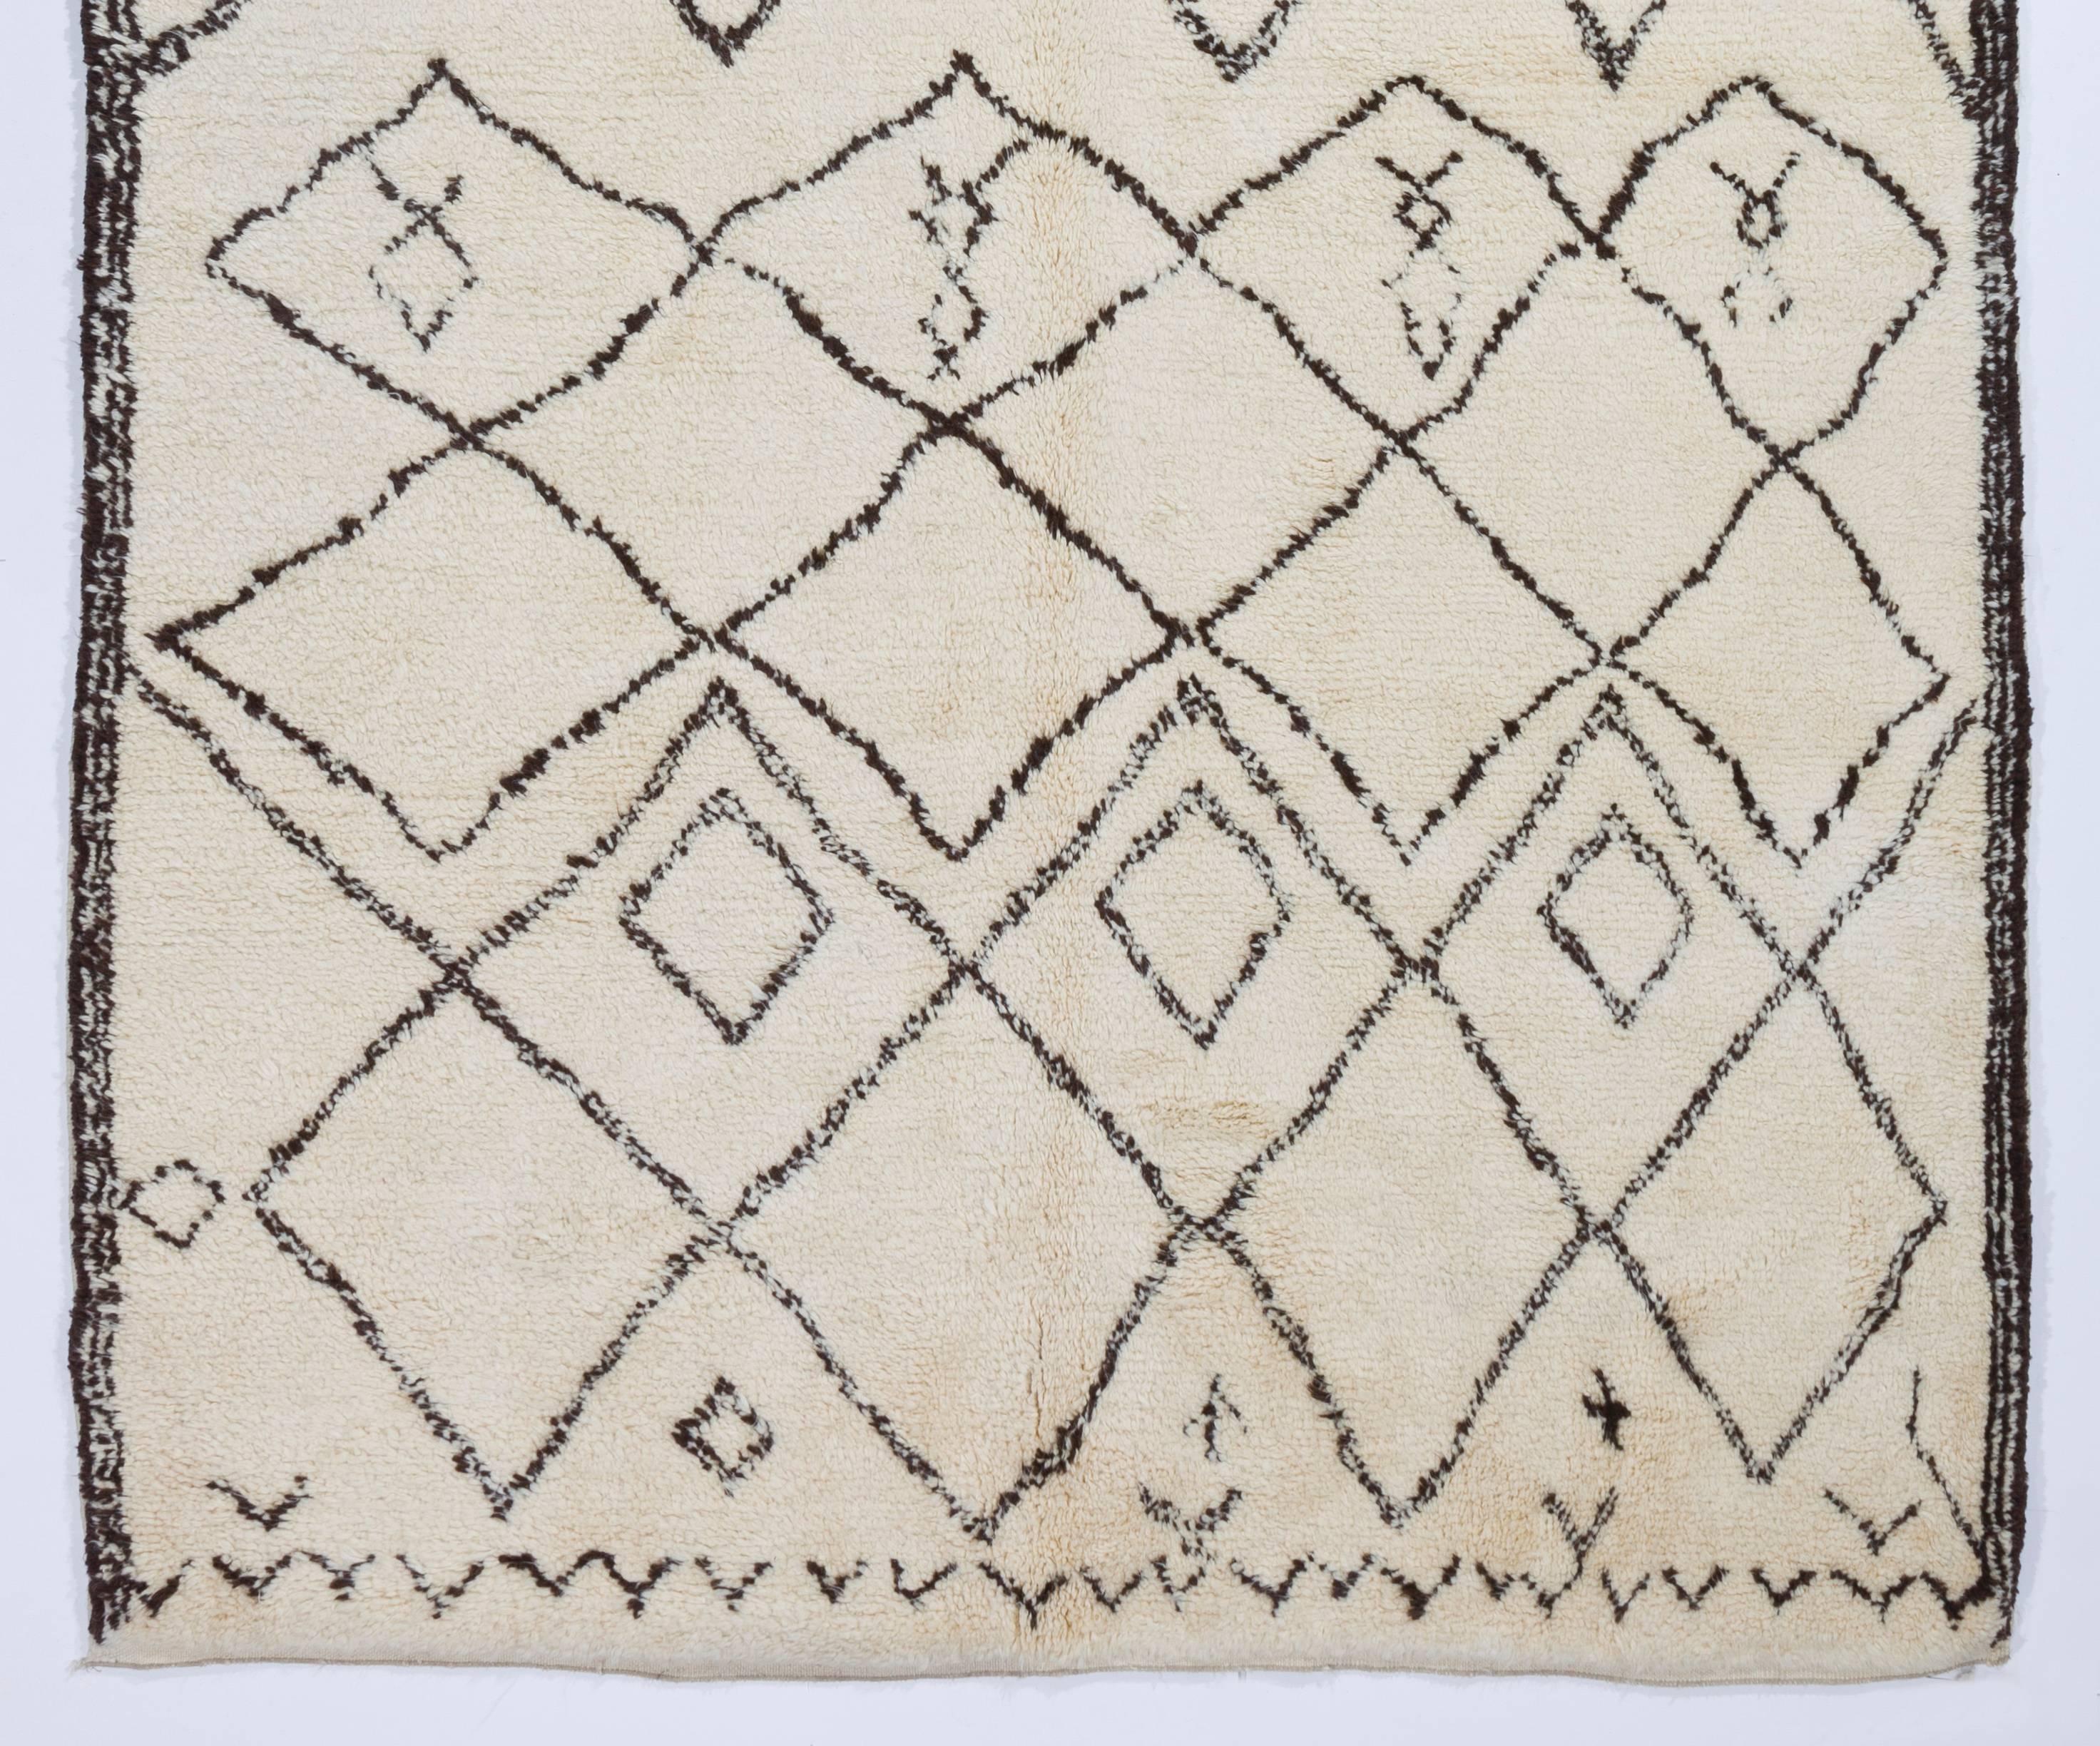 A brand new hand knotted contemporary Moroccan rug made of natural undyed, hand-spun sheep wool.

The rug is available as seen or if requested, it can be custom produced in a different size, color combination and design in 5-6 weeks.
